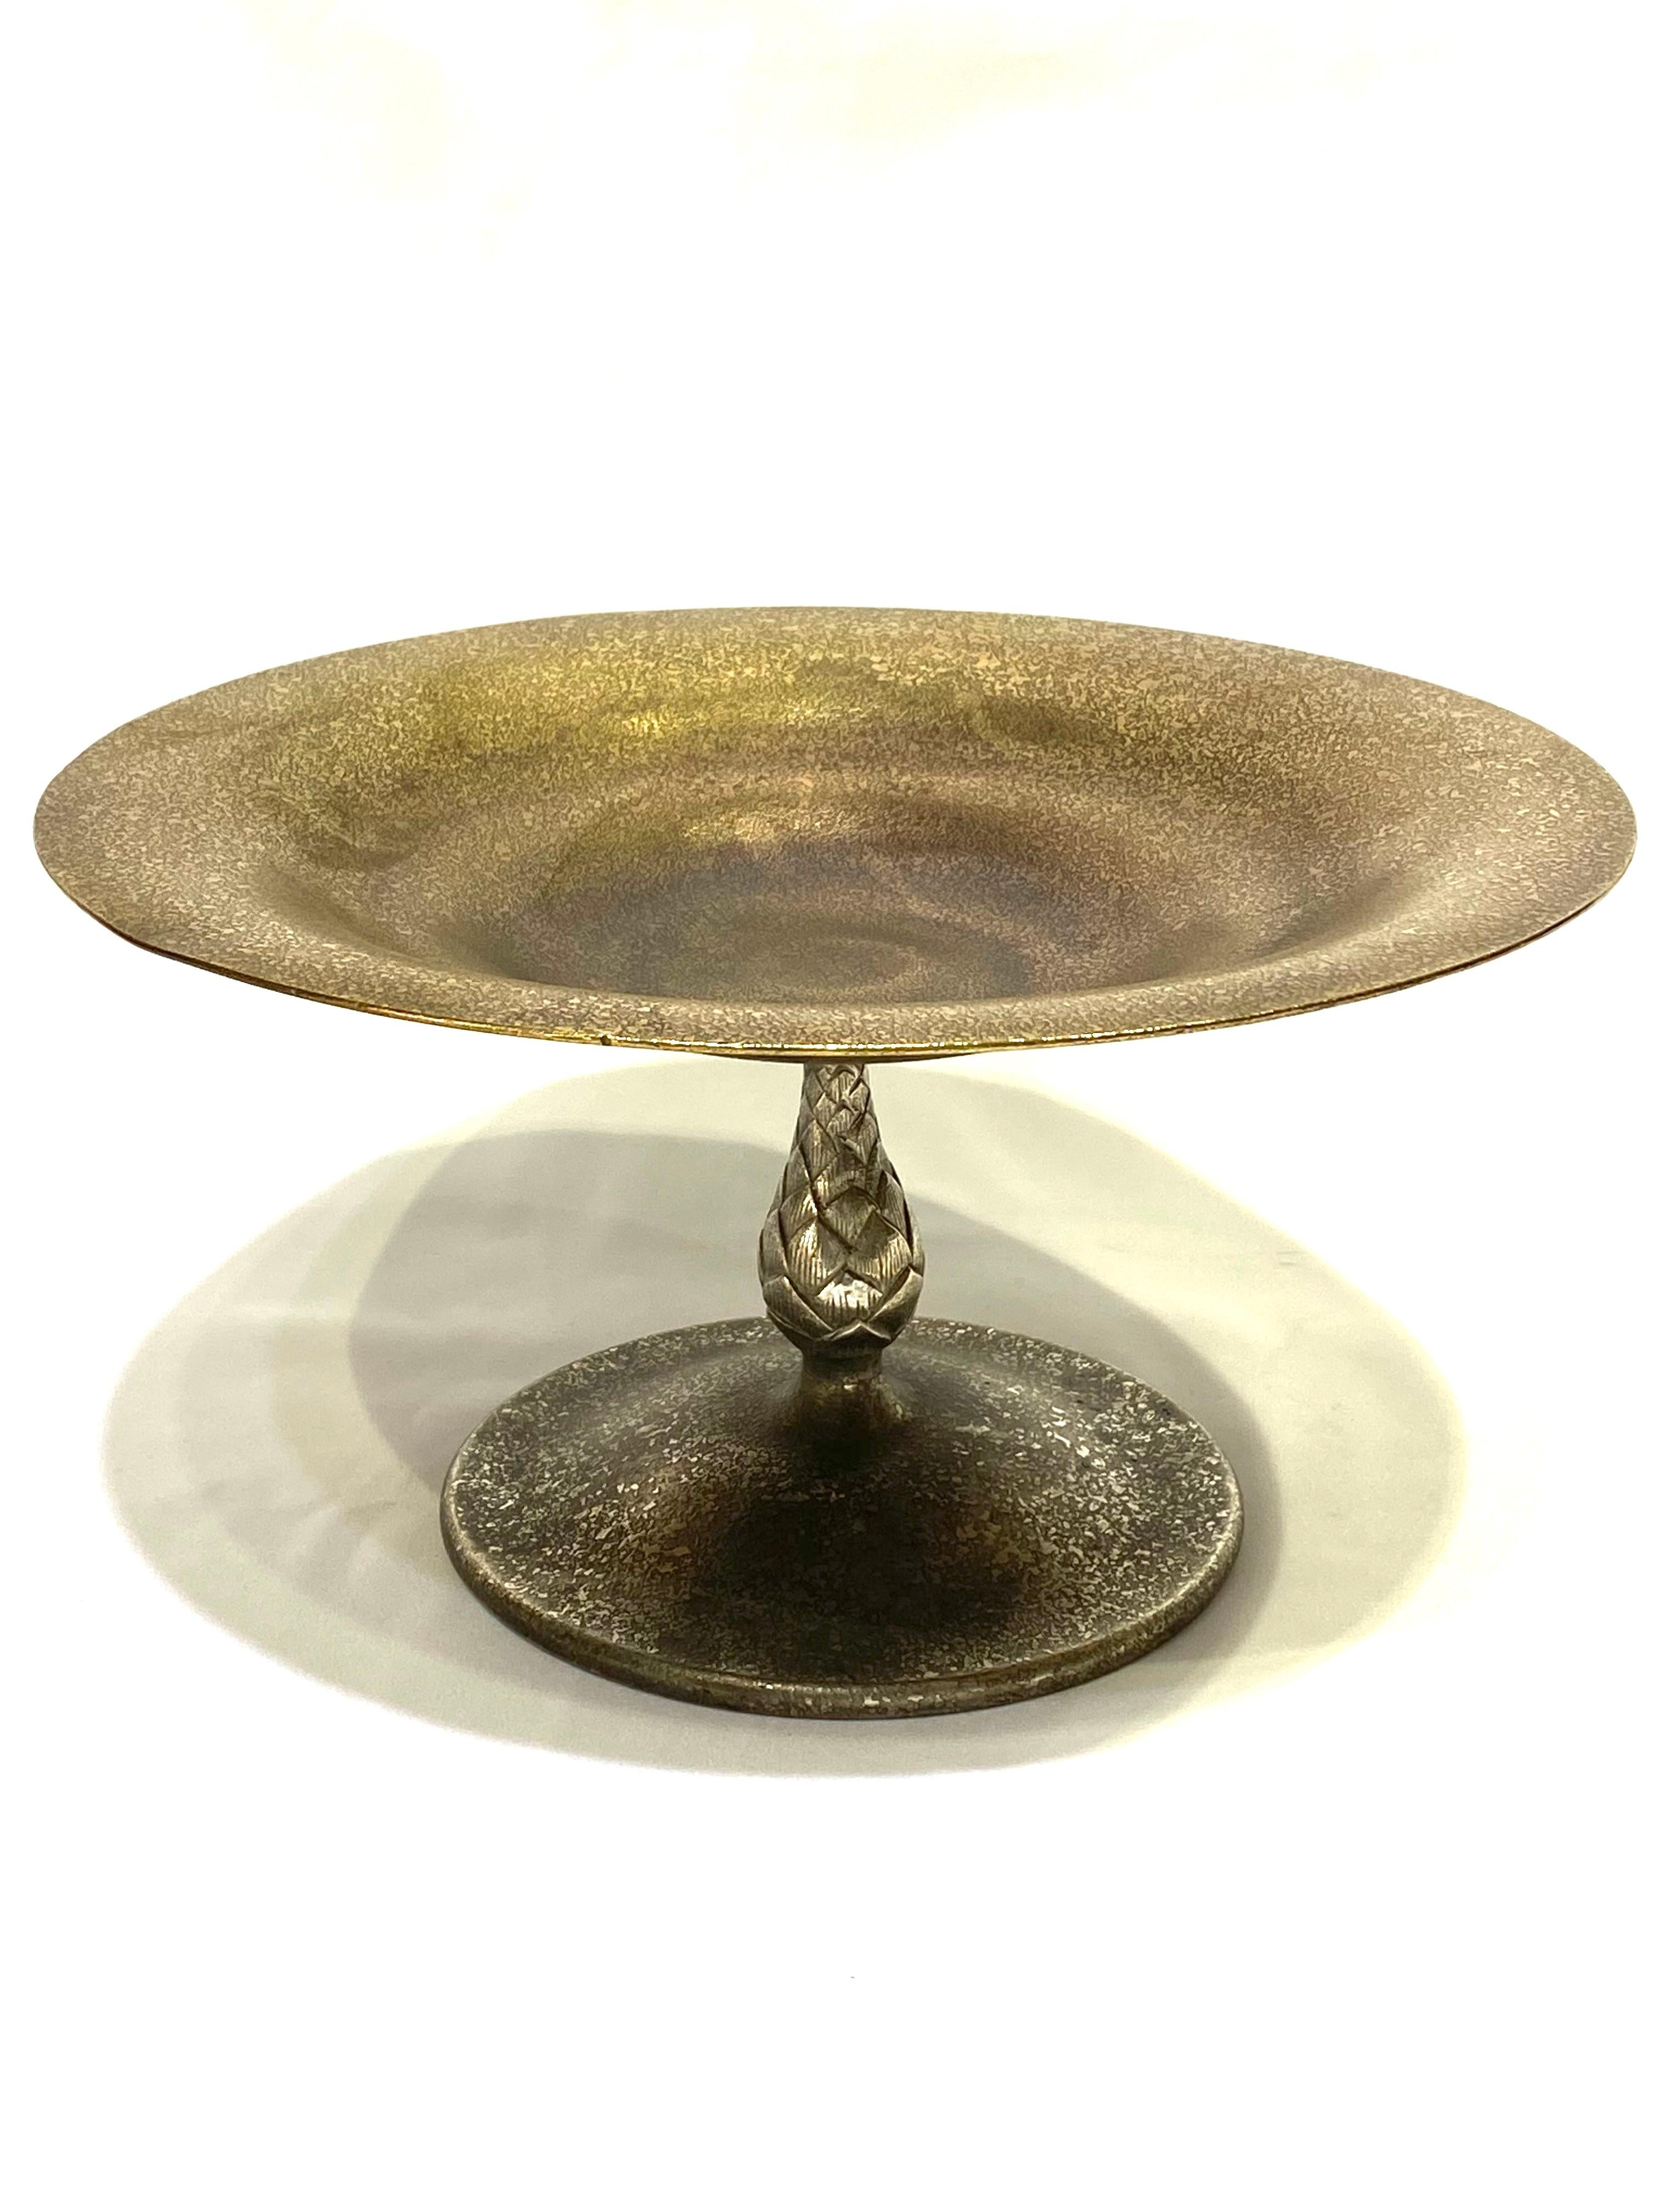 Tiffany Studios Bronze Tazza In Excellent Condition In Beverly Hills, CA